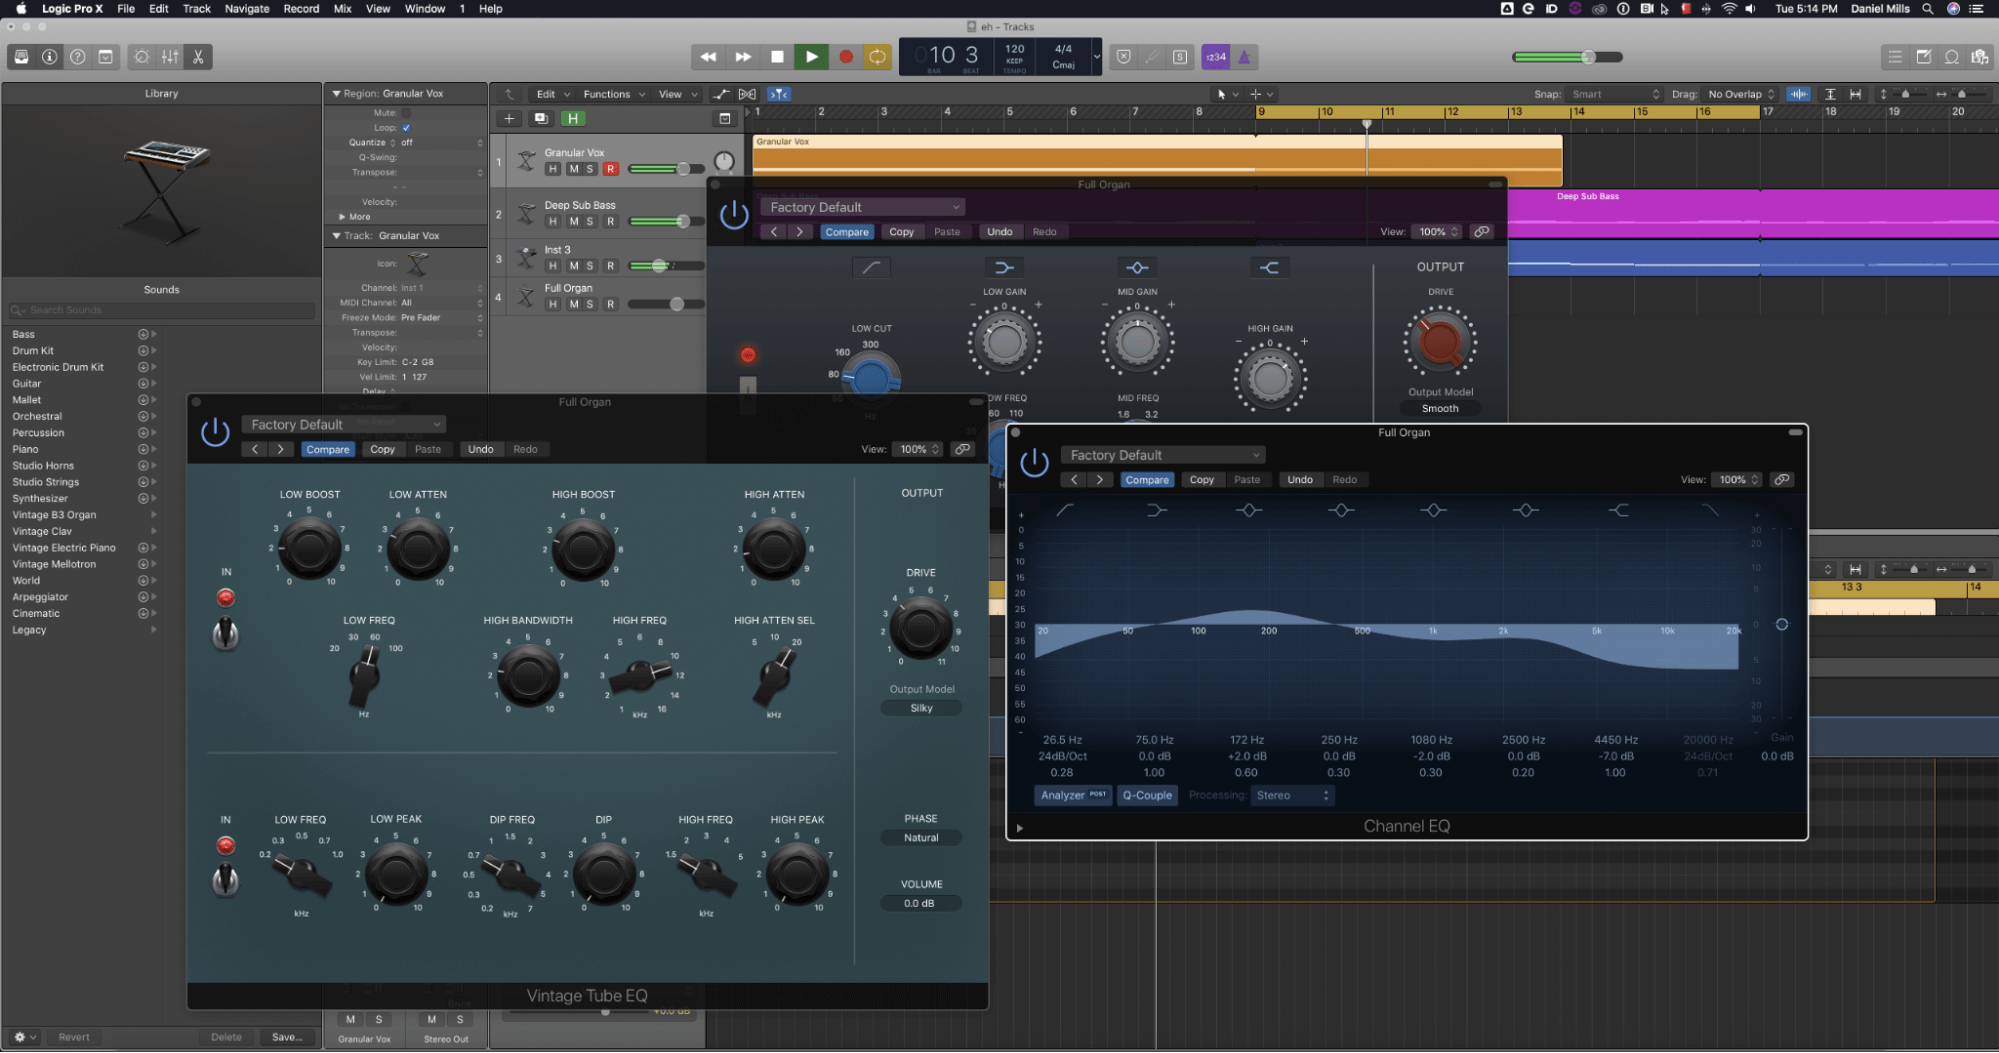 How to Use Parametric EQ on WiiM Pro & WiiM Pro Plus: A Comprehensive Guide